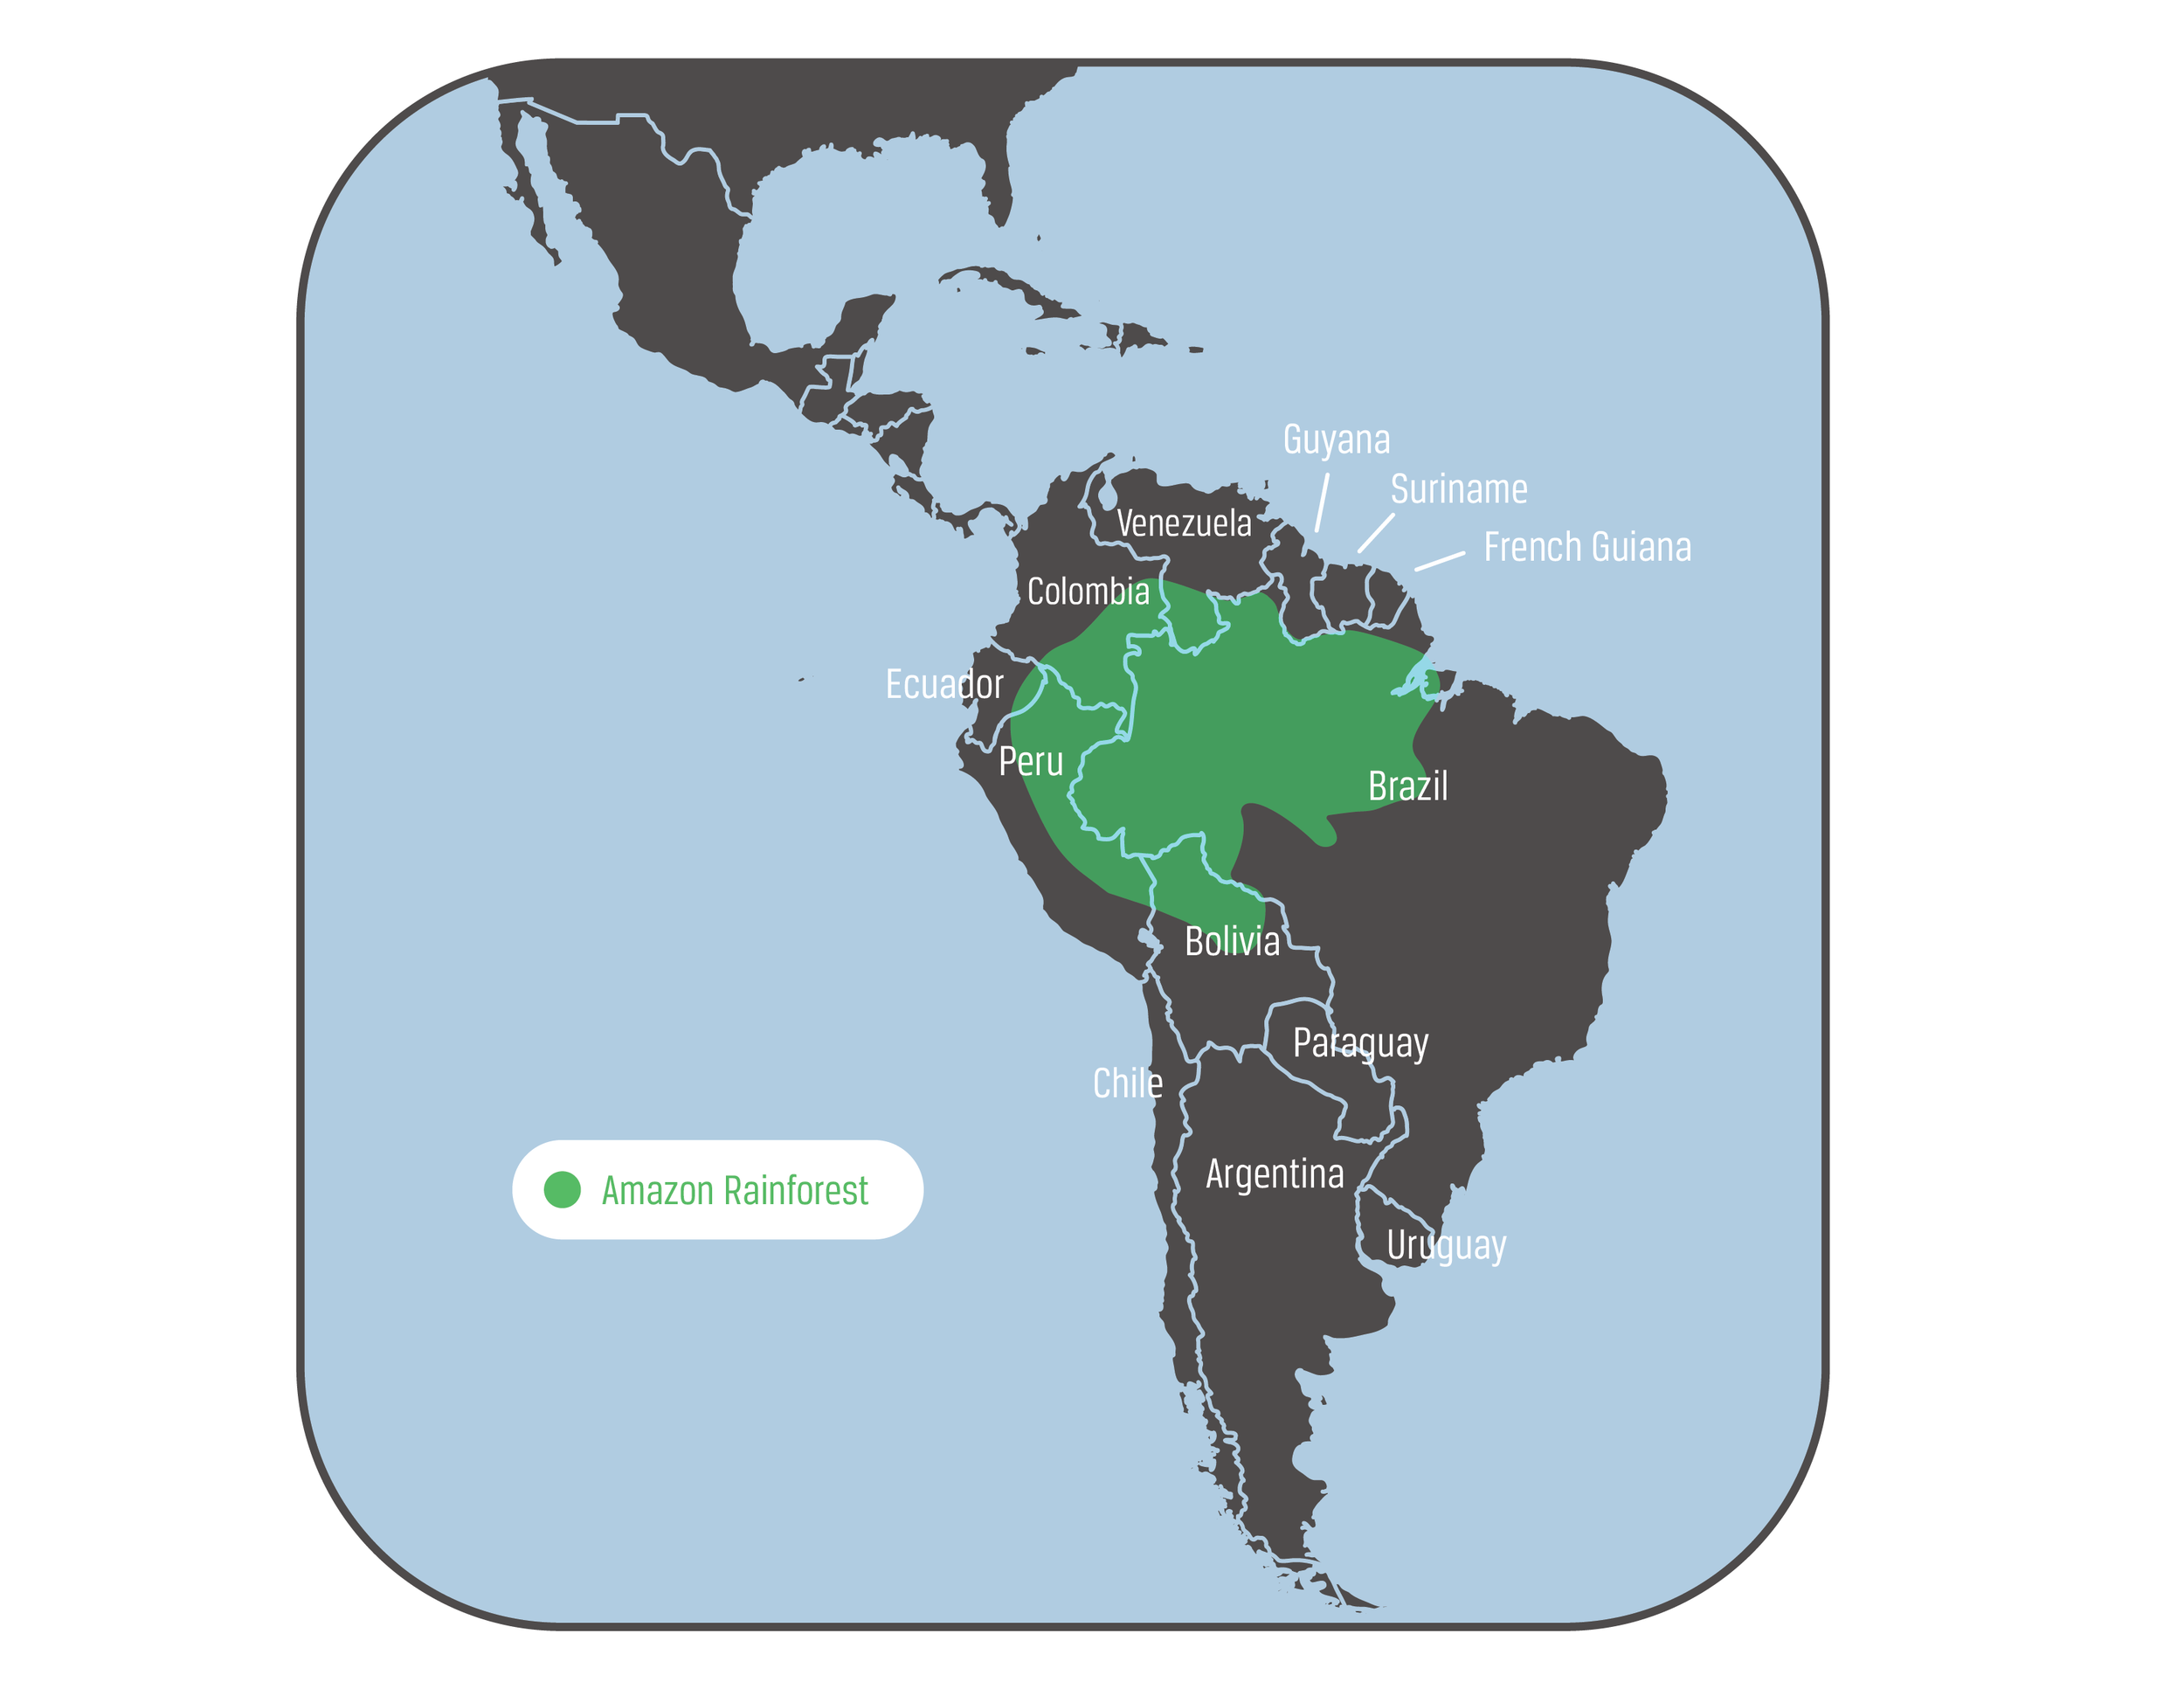 The Amazon spans more than 670 million hectares, making it the largest rainforest in the world.